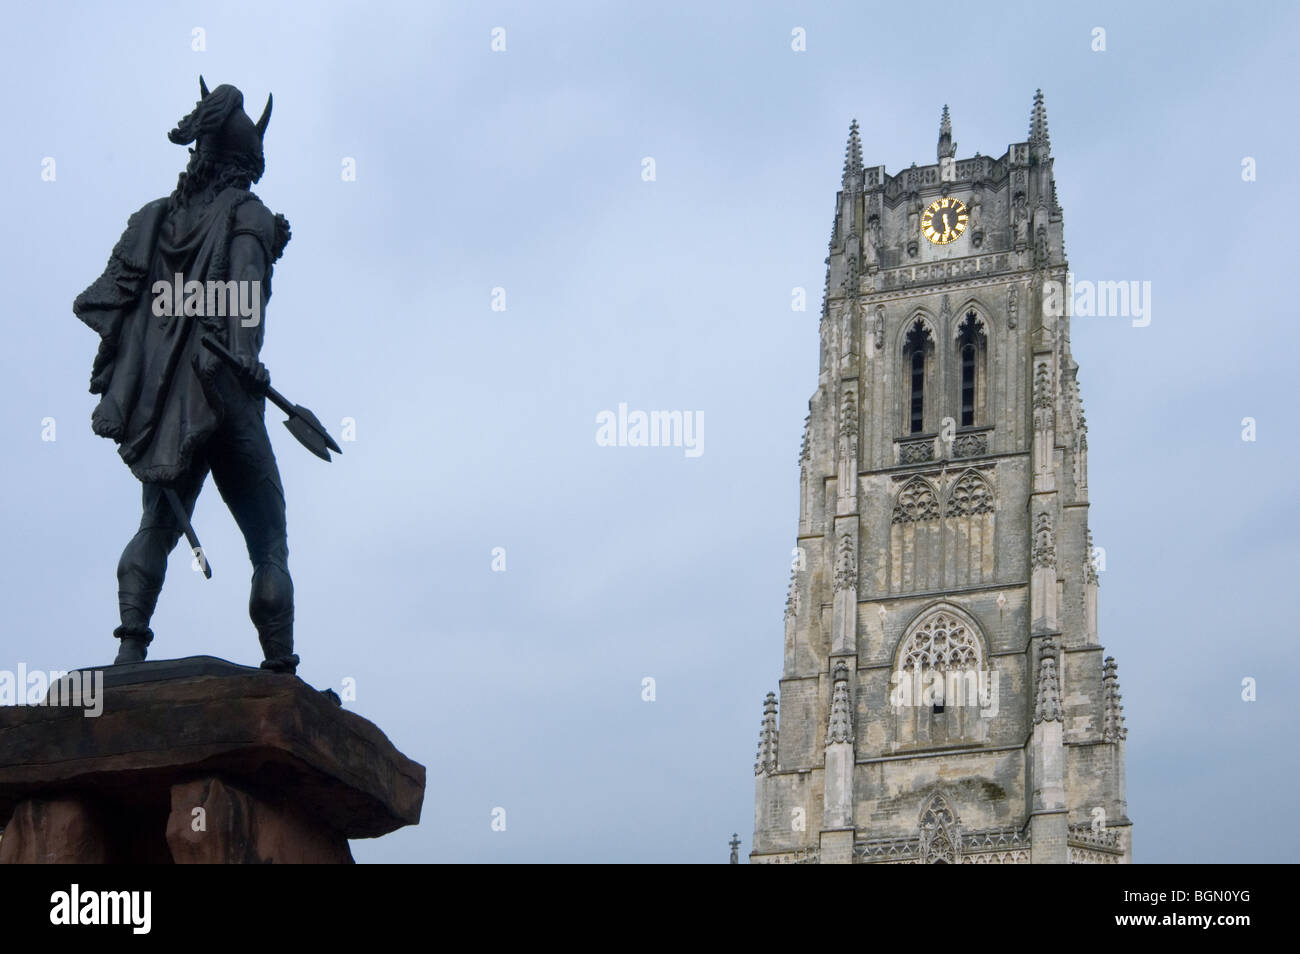 Basilica of Our Lady / Onze-Lieve-Vrouwebasiliek and the statue of Ambiorix, prince of the Eburones, Tongeren / Tongres, Belgium Stock Photo